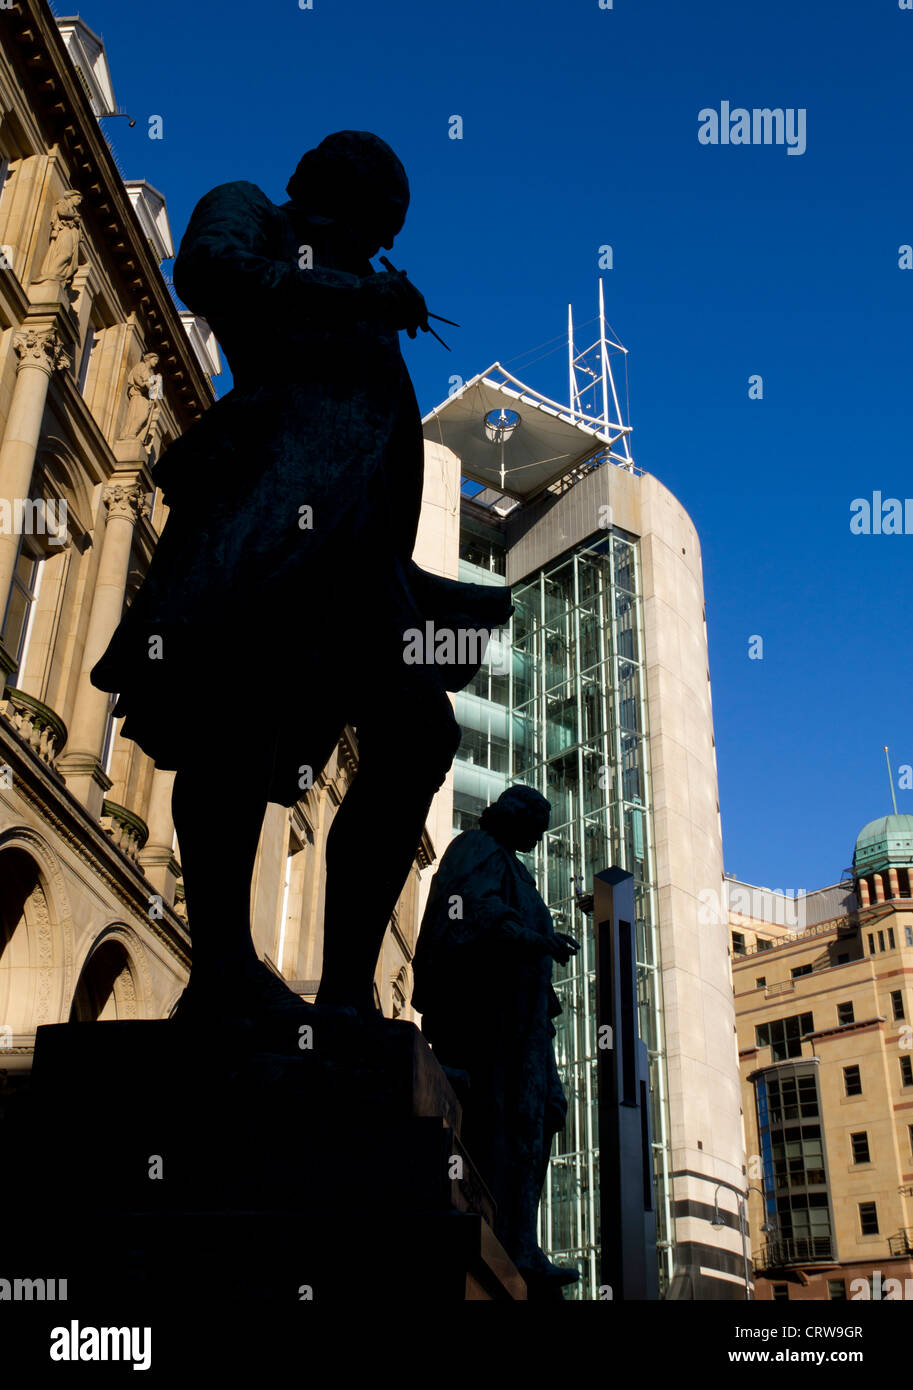 Statues of James Watt and John Harrison, silhouetted in City Square Leeds. Stock Photo